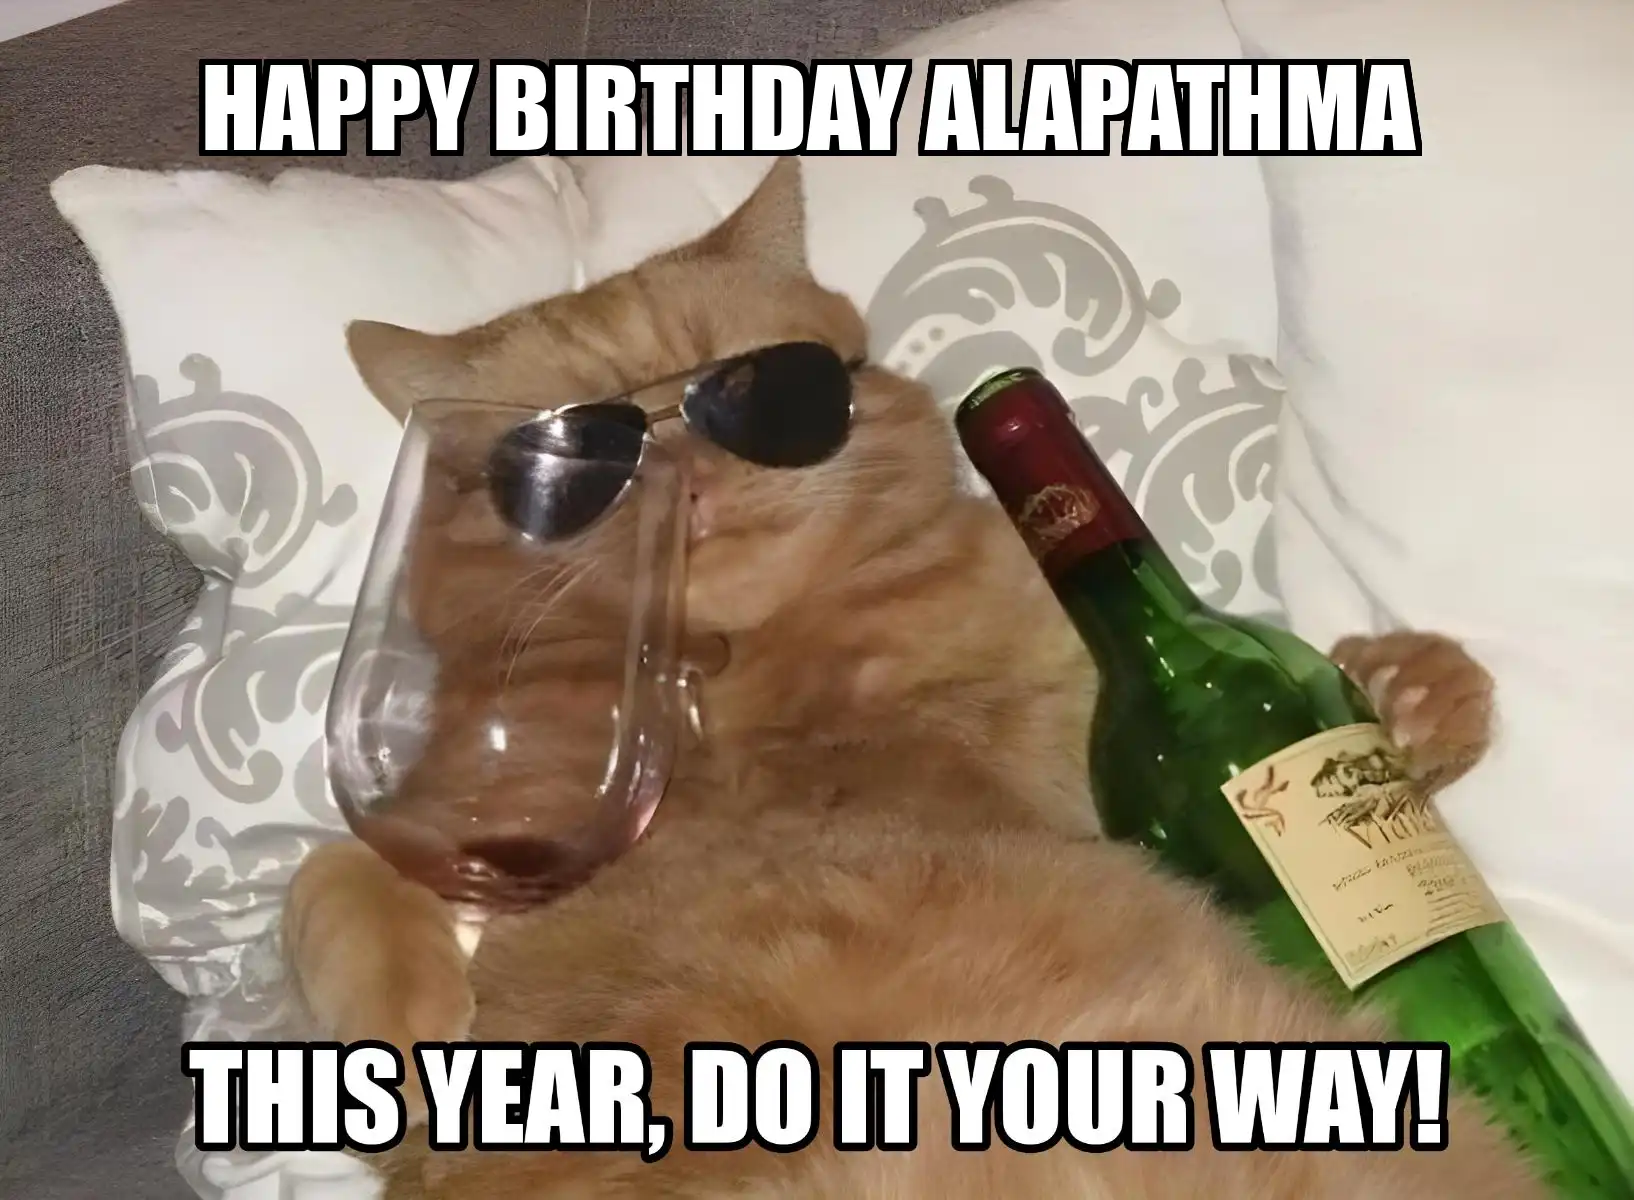 Happy Birthday Alapathma This Year Do It Your Way Meme